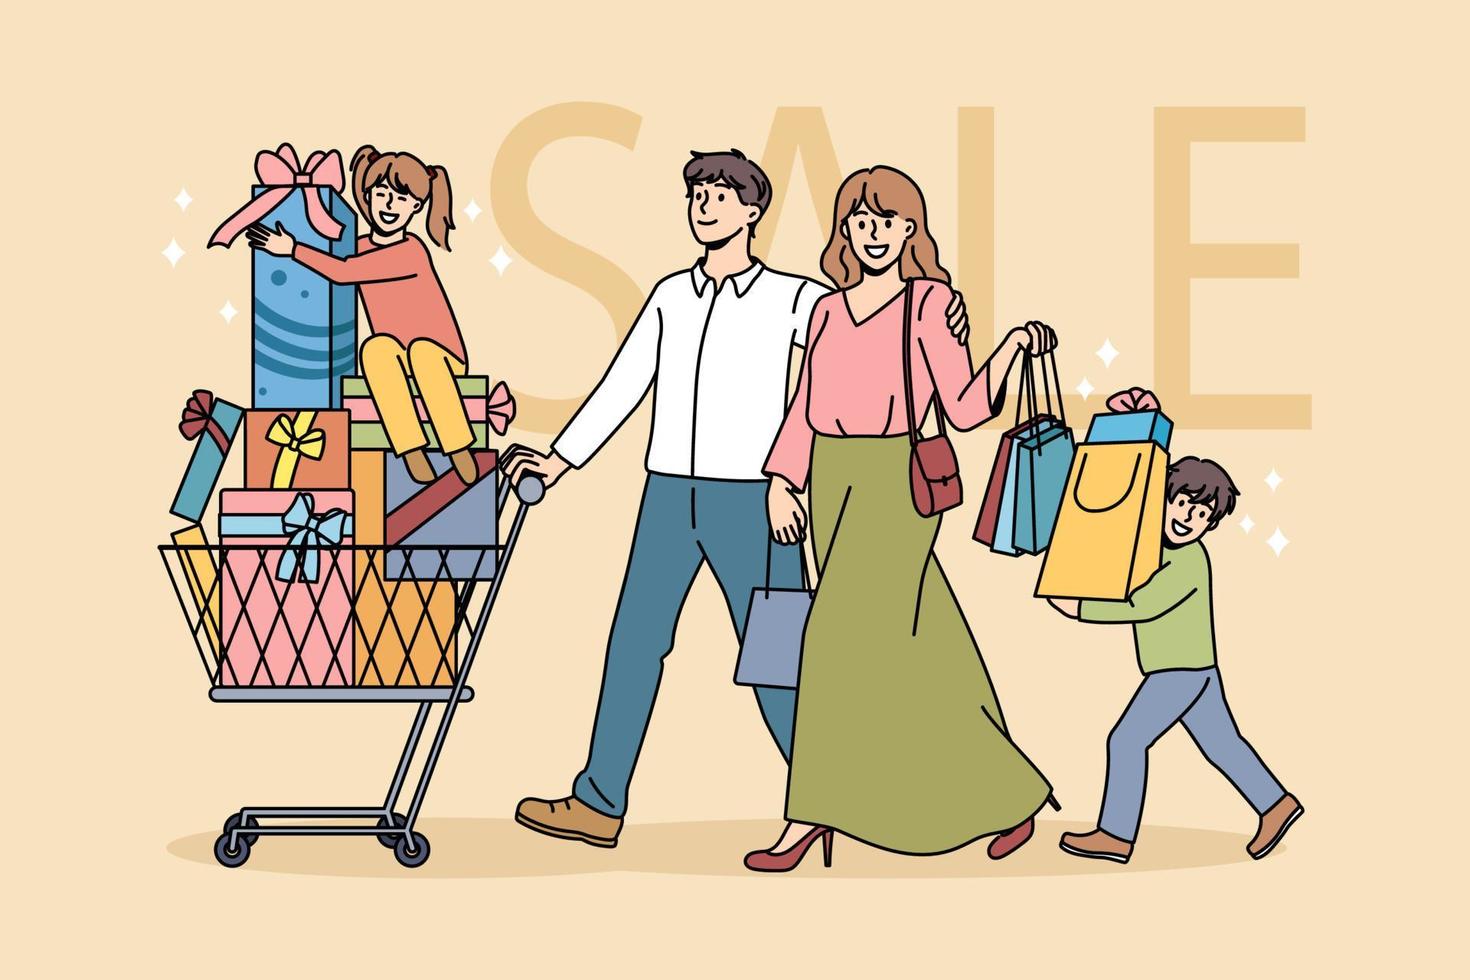 Happy family with children shopping together buying gifts for New Year in mall. Smiling parents and small kids purchase presents for Christmas winter holidays celebration. Flat vector illustration.